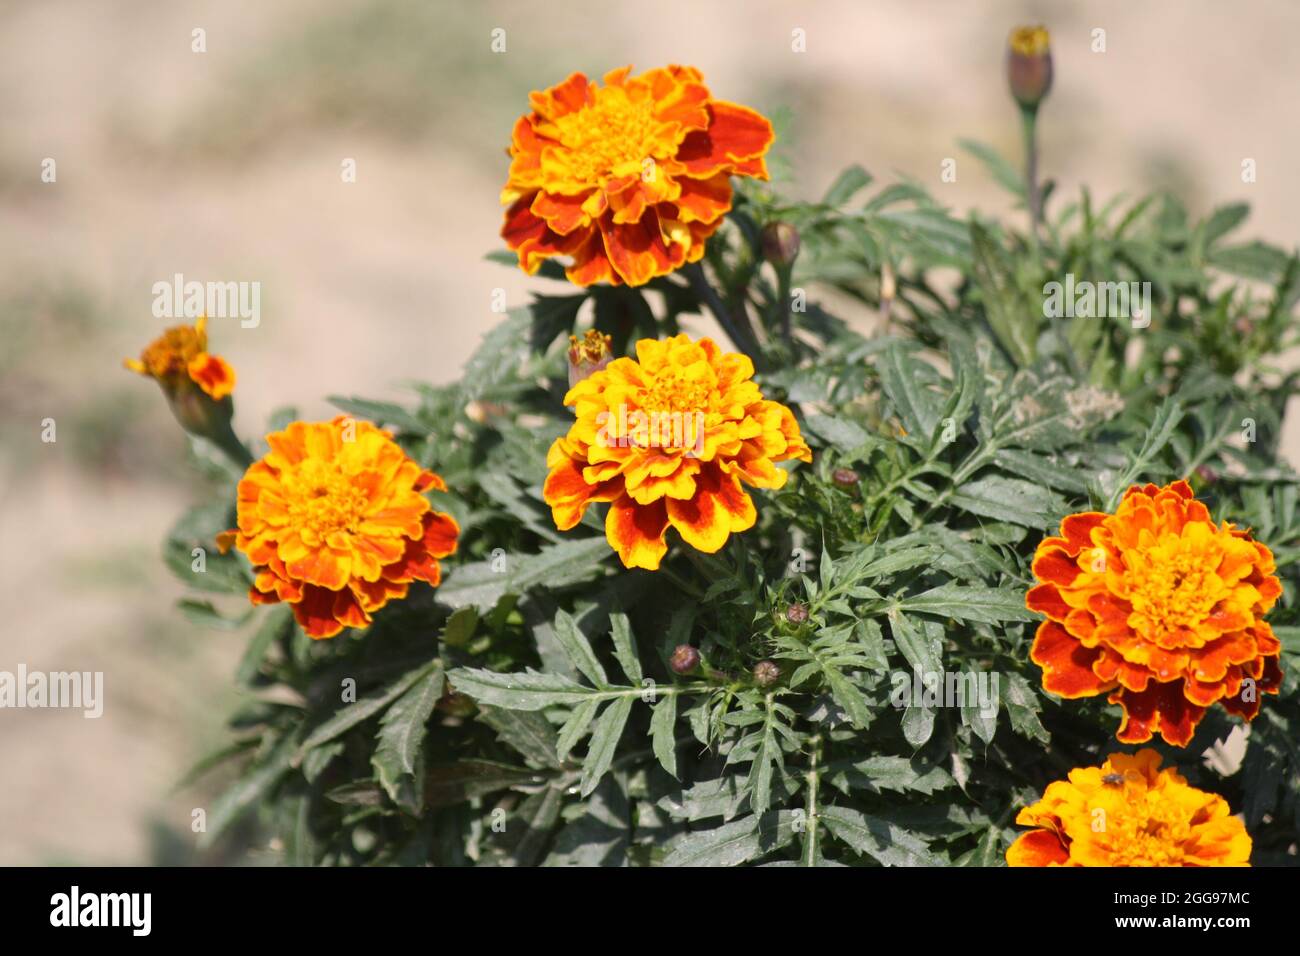 Cluster of French marigold (Tagetes patula) flowers Stock Photo